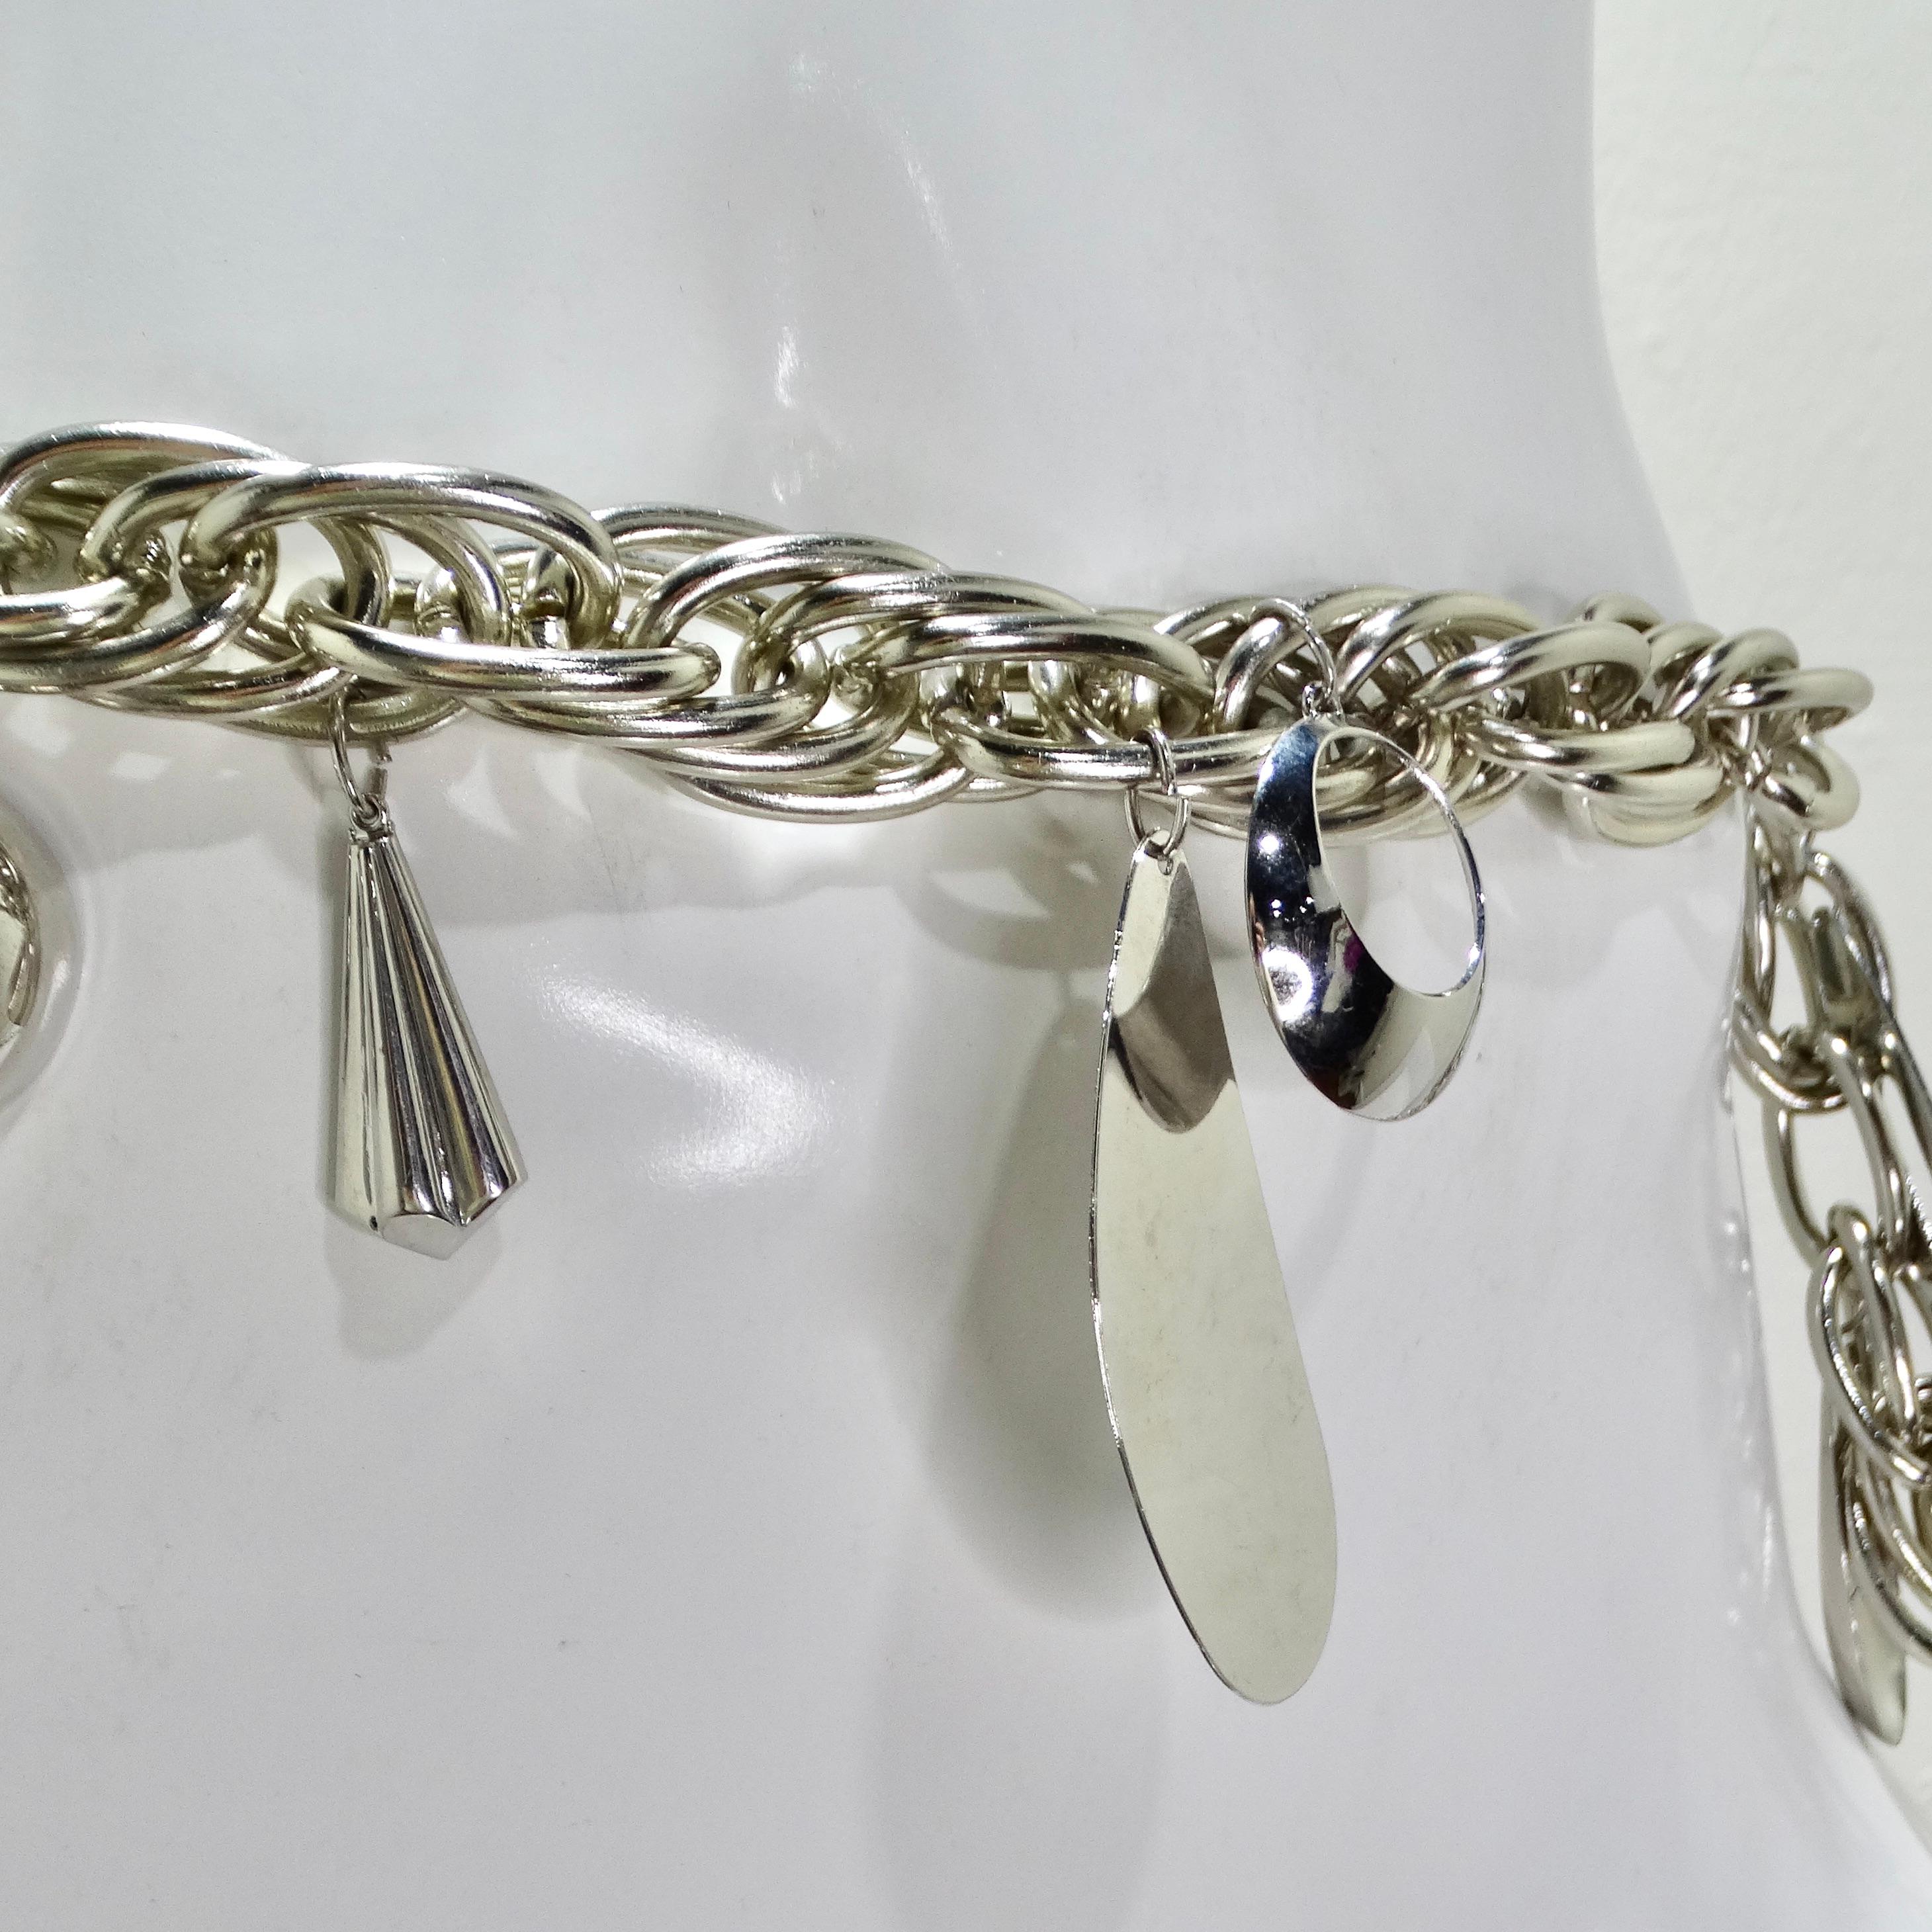 Pucci 1980s Silver Tone Charm Chain Belt In Good Condition For Sale In Scottsdale, AZ